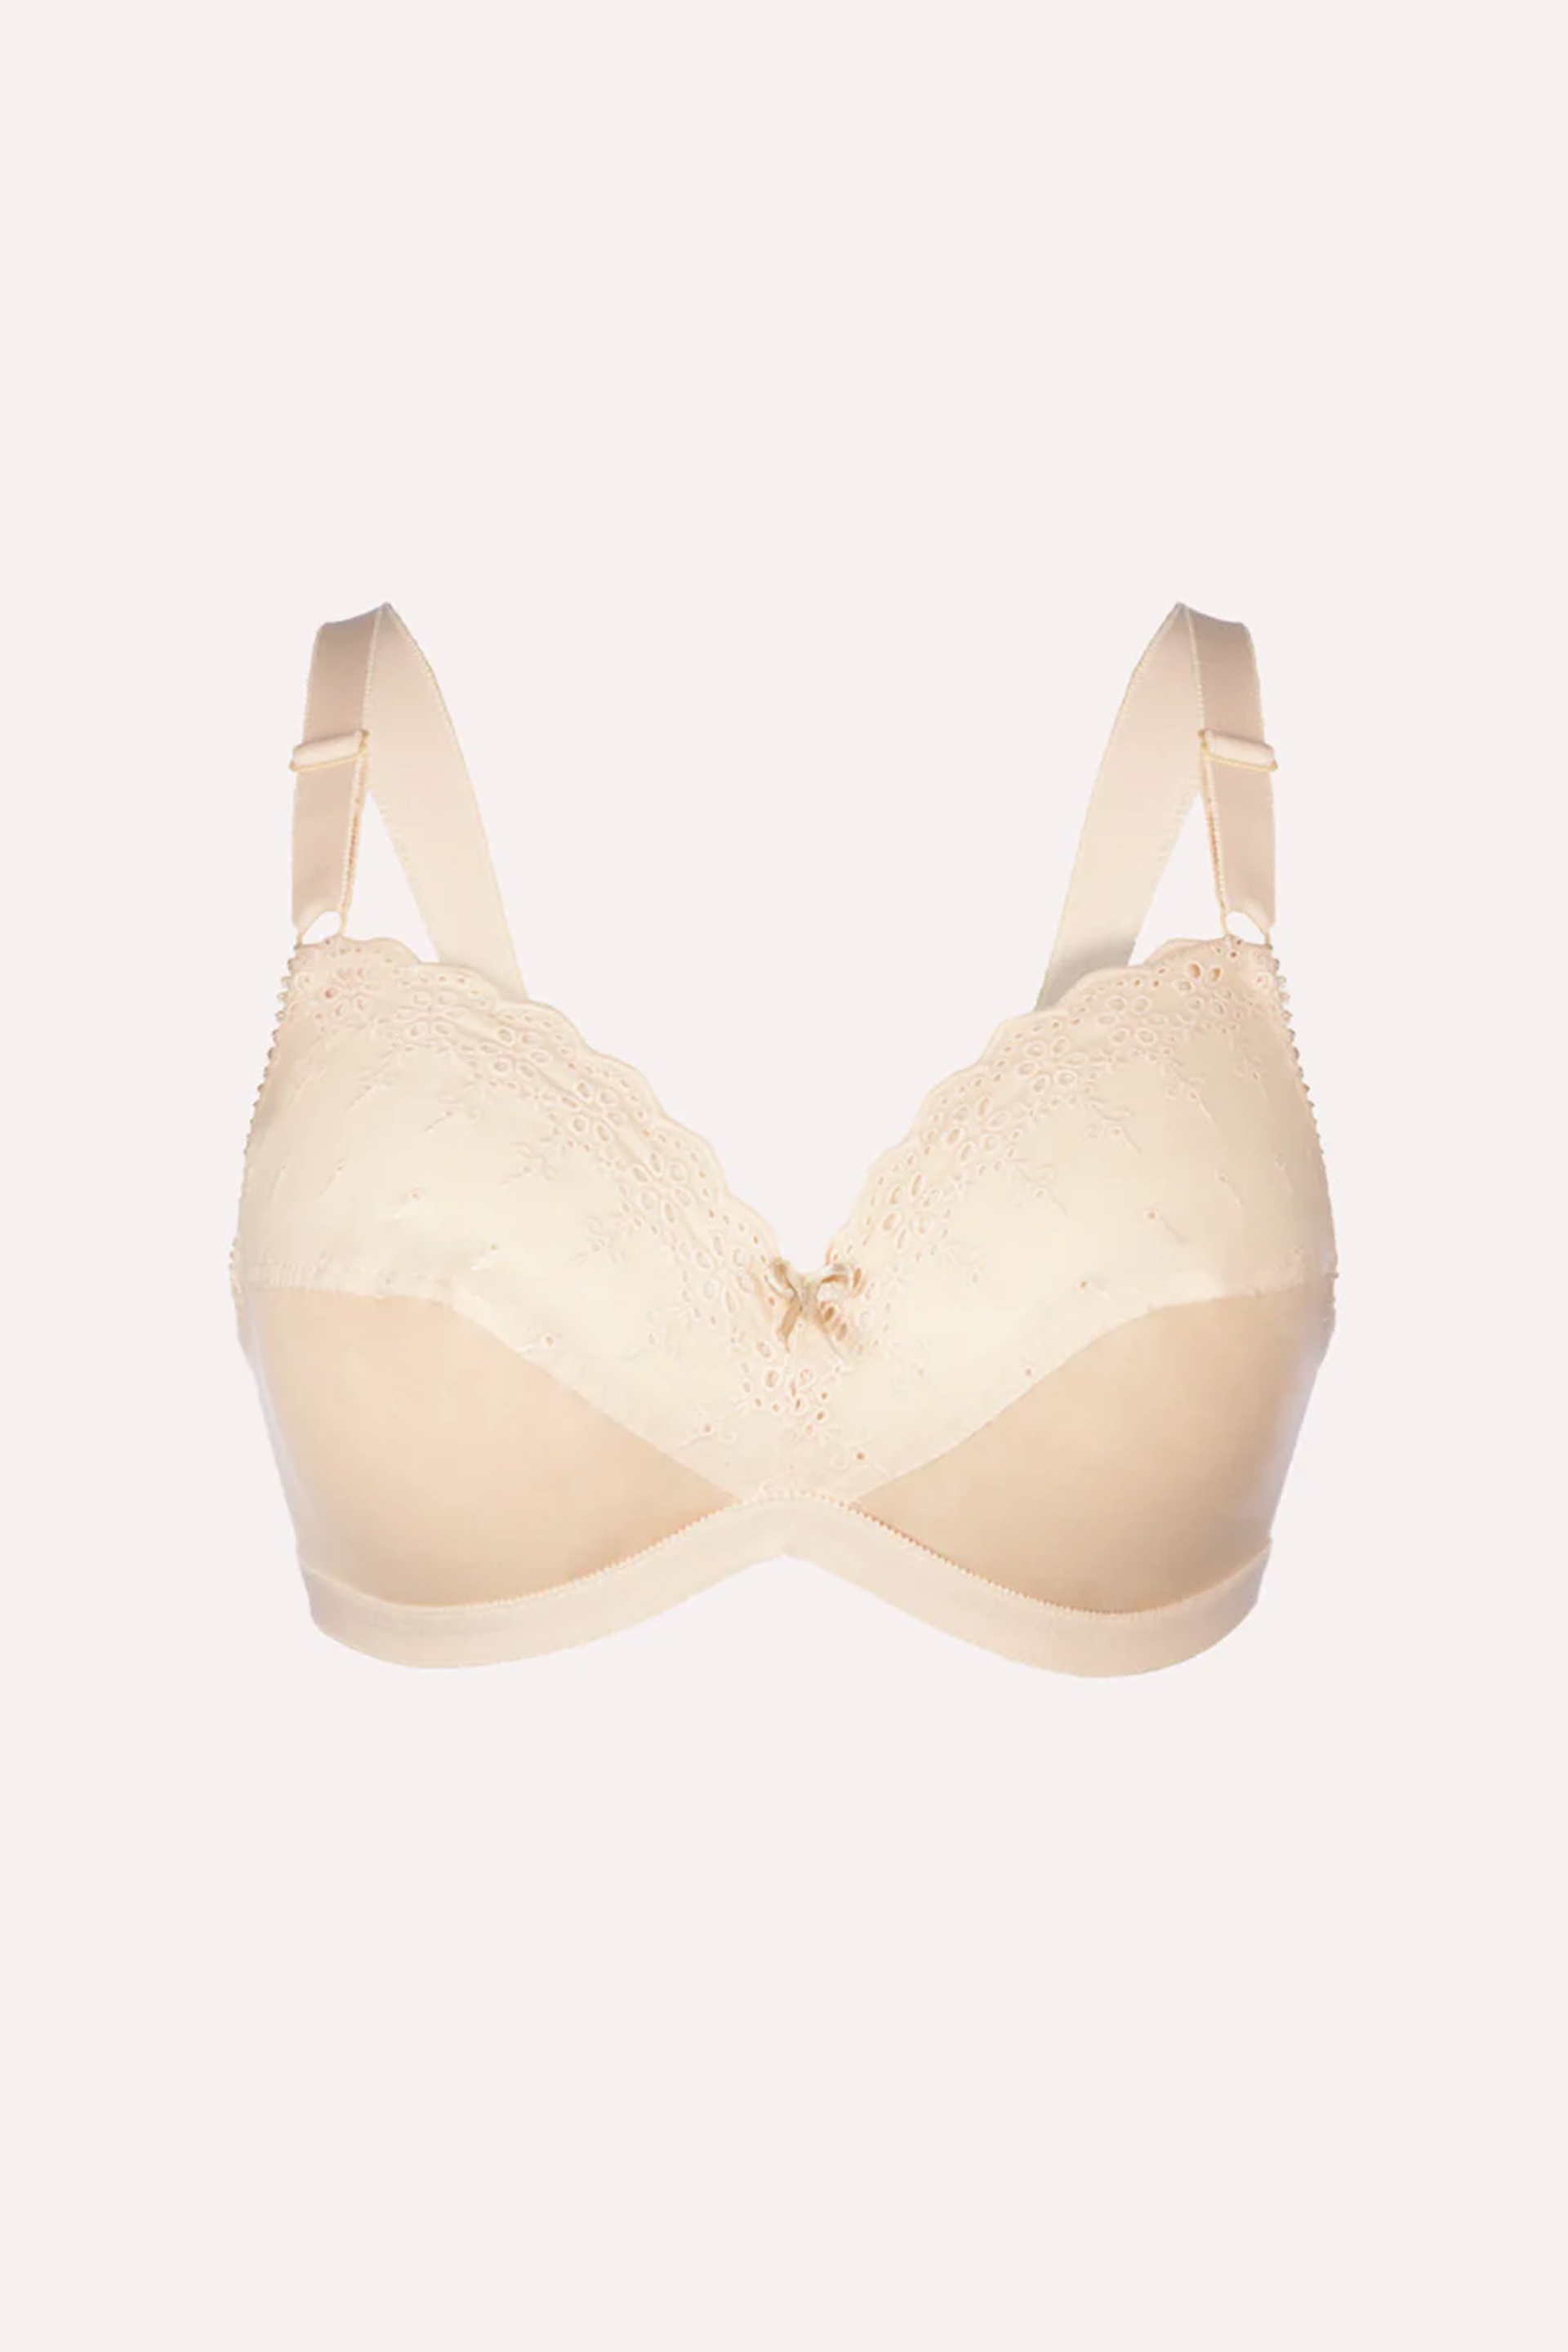 Buy Cotton Non Padded Bras for Women/Girls at Lowest Price in Pakistan